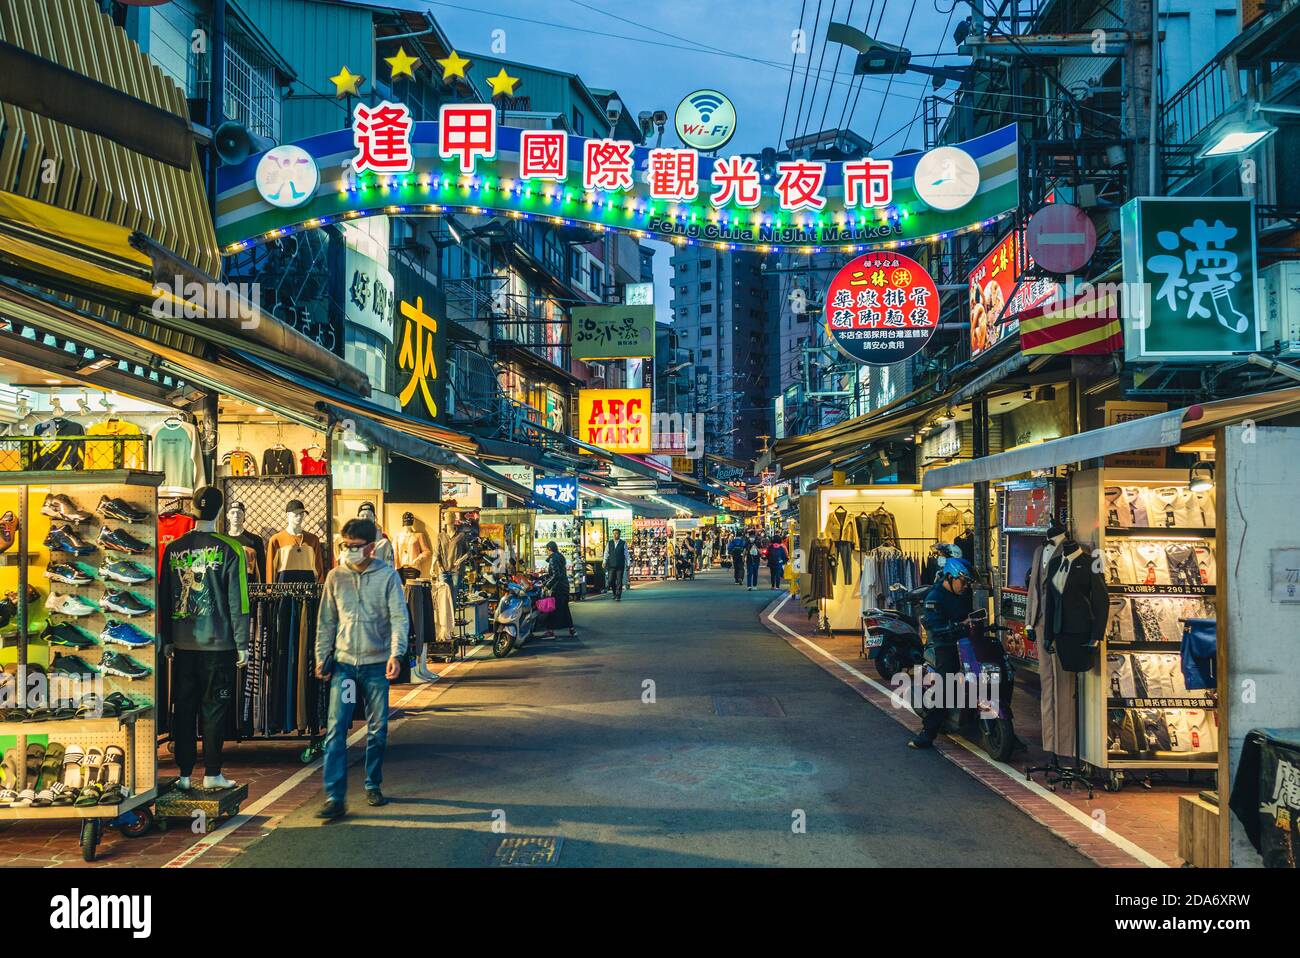 November 10, 2020: Fengjia Night Market, is one of Taichung famous commercial business districts and cliamed to be the largest night market in Taiwan, Stock Photo